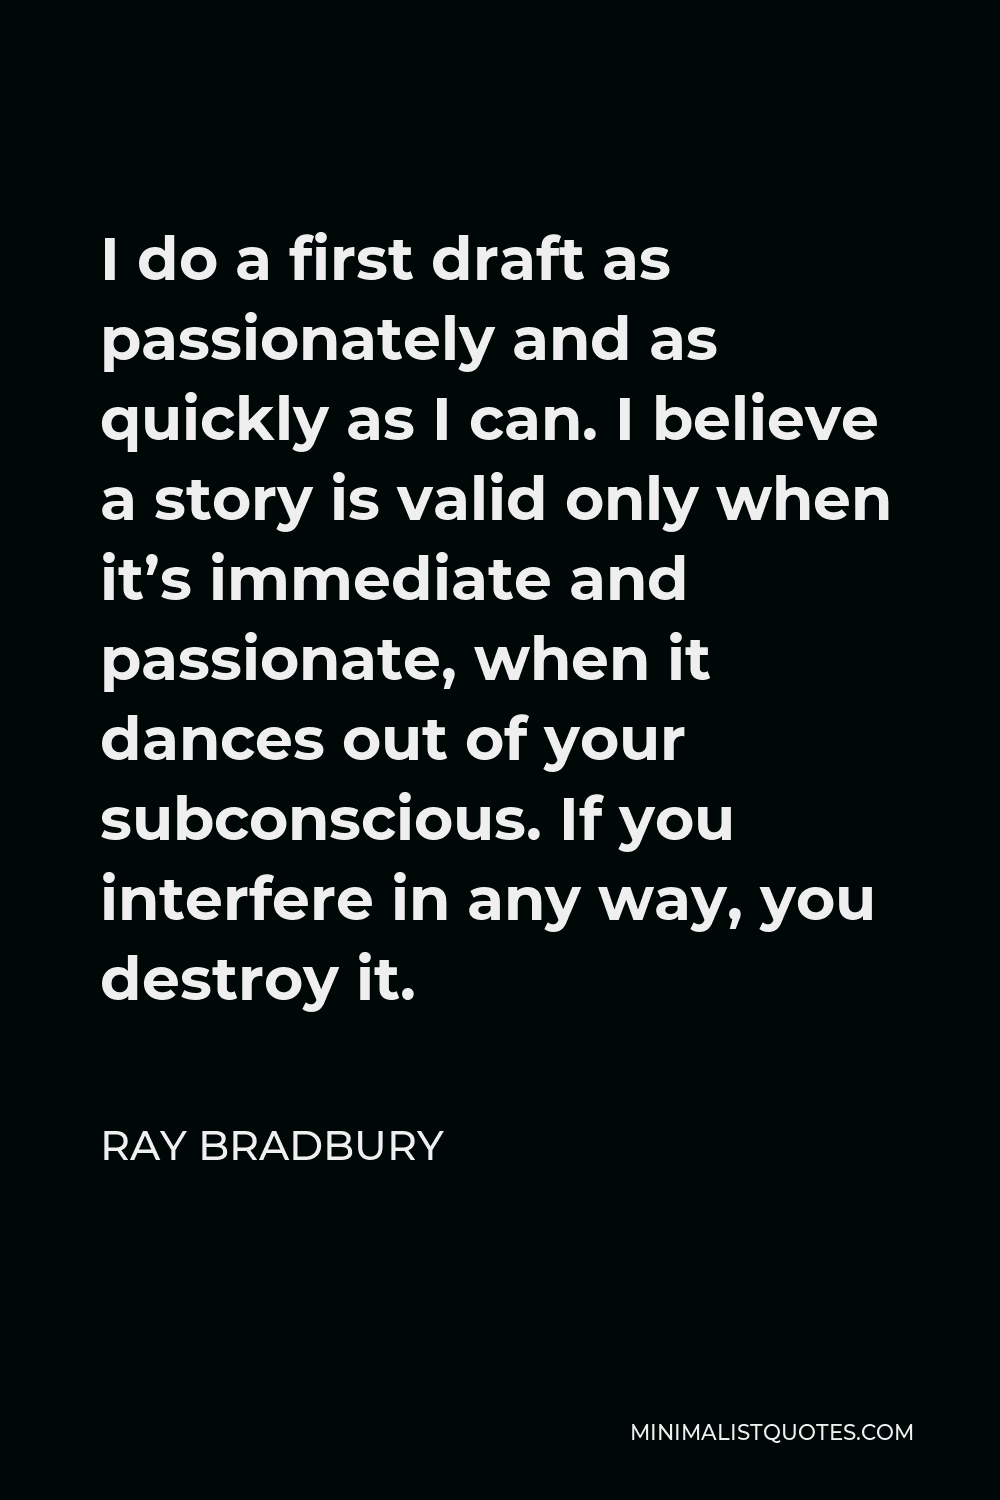 Ray Bradbury Quote - I do a first draft as passionately and as quickly as I can. I believe a story is valid only when it’s immediate and passionate, when it dances out of your subconscious. If you interfere in any way, you destroy it.